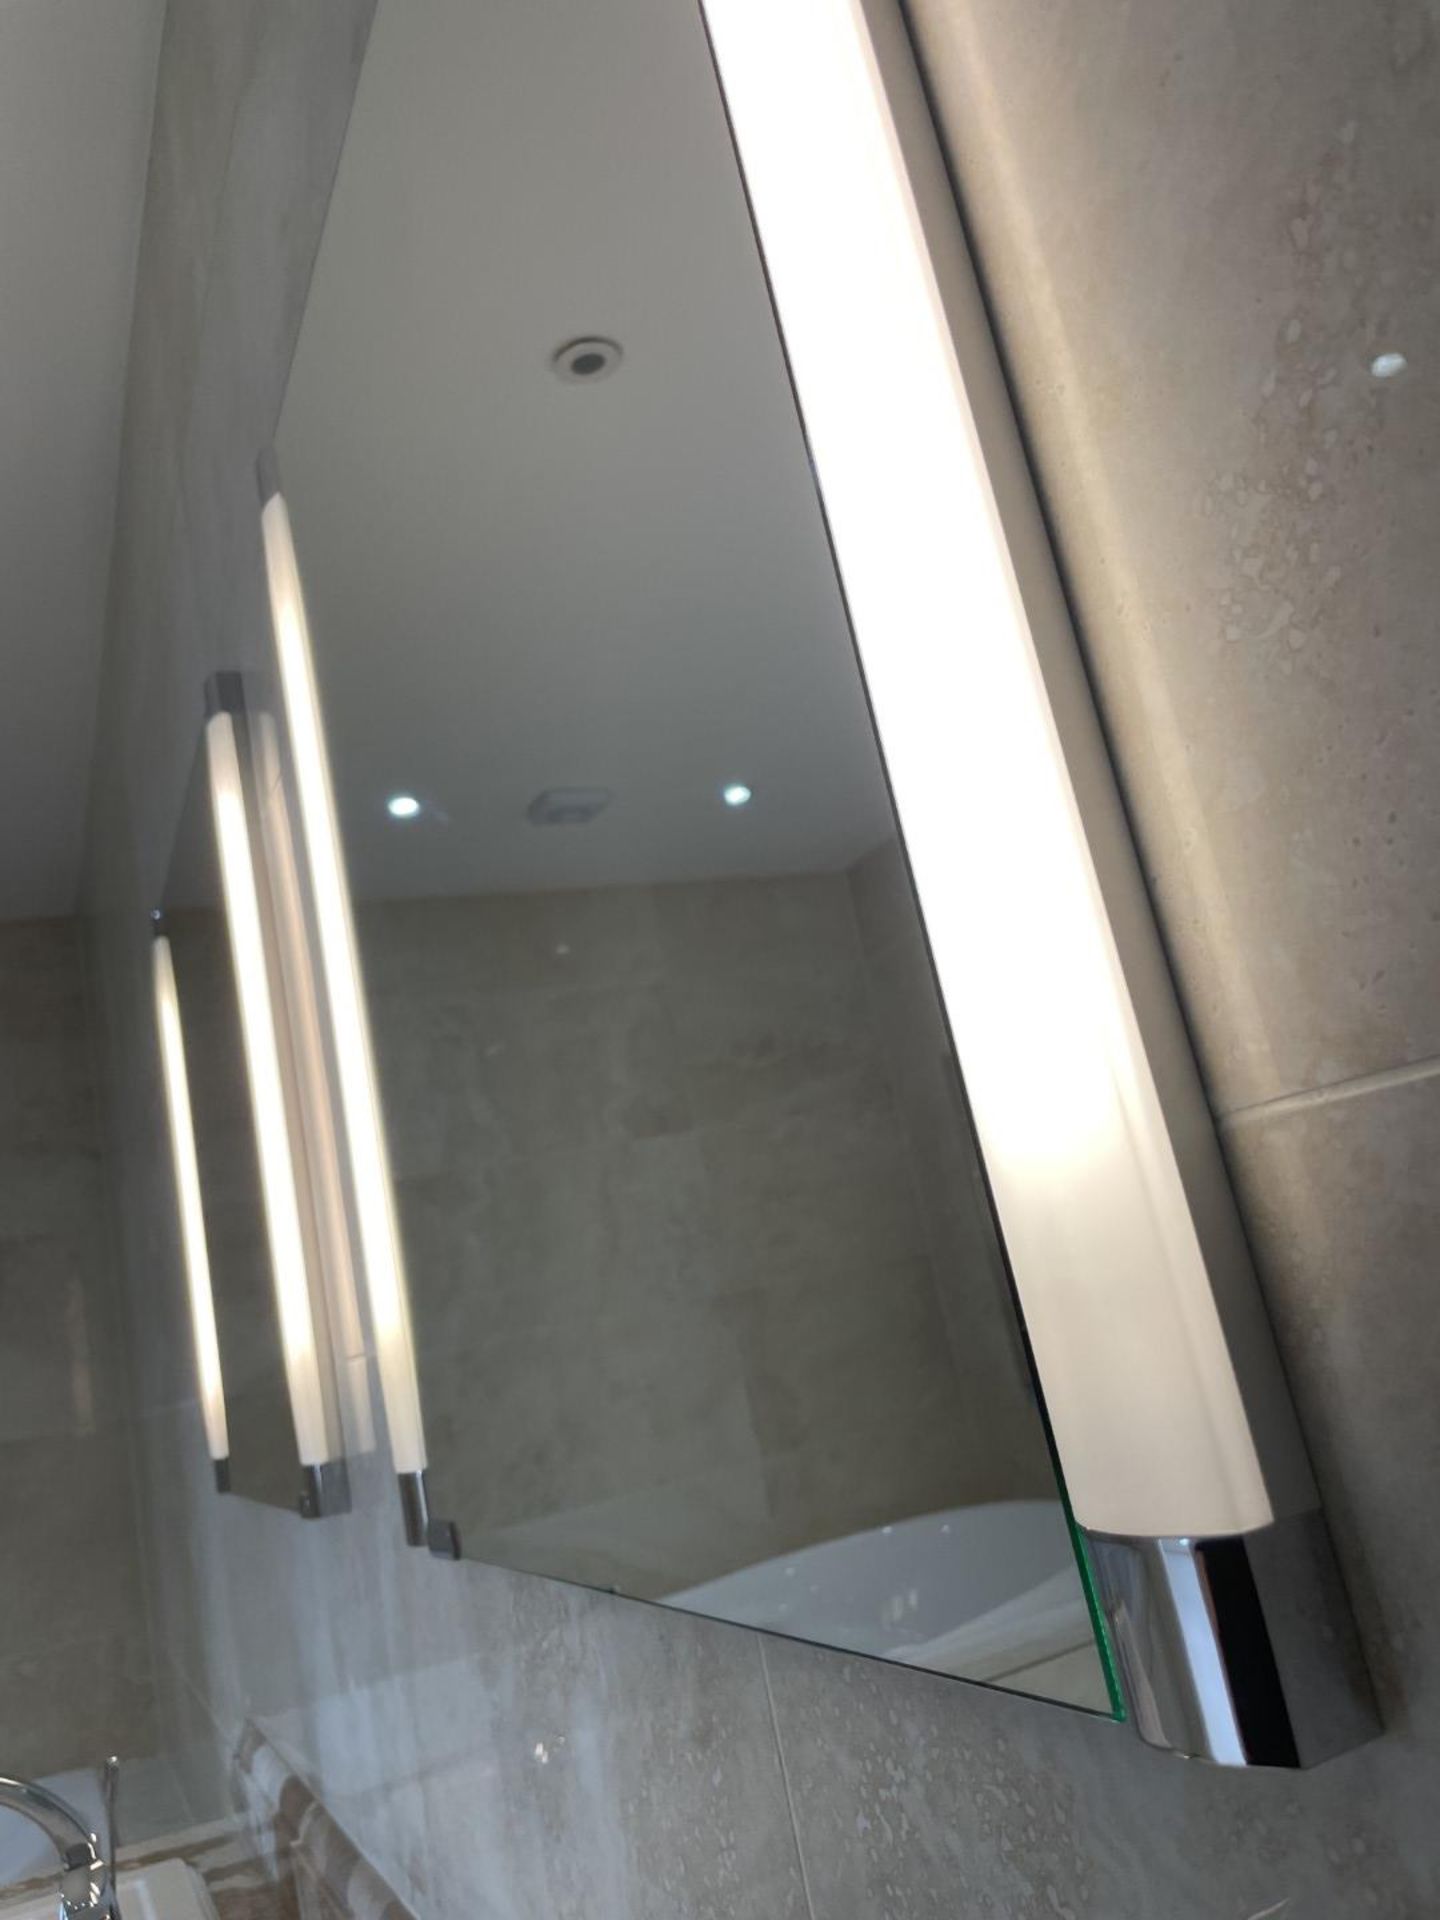 2 x KEUCO Illuminated Mirrored Wall Mounted Cabinets - Total Original Value: £2,000 - Ref: - Image 10 of 19